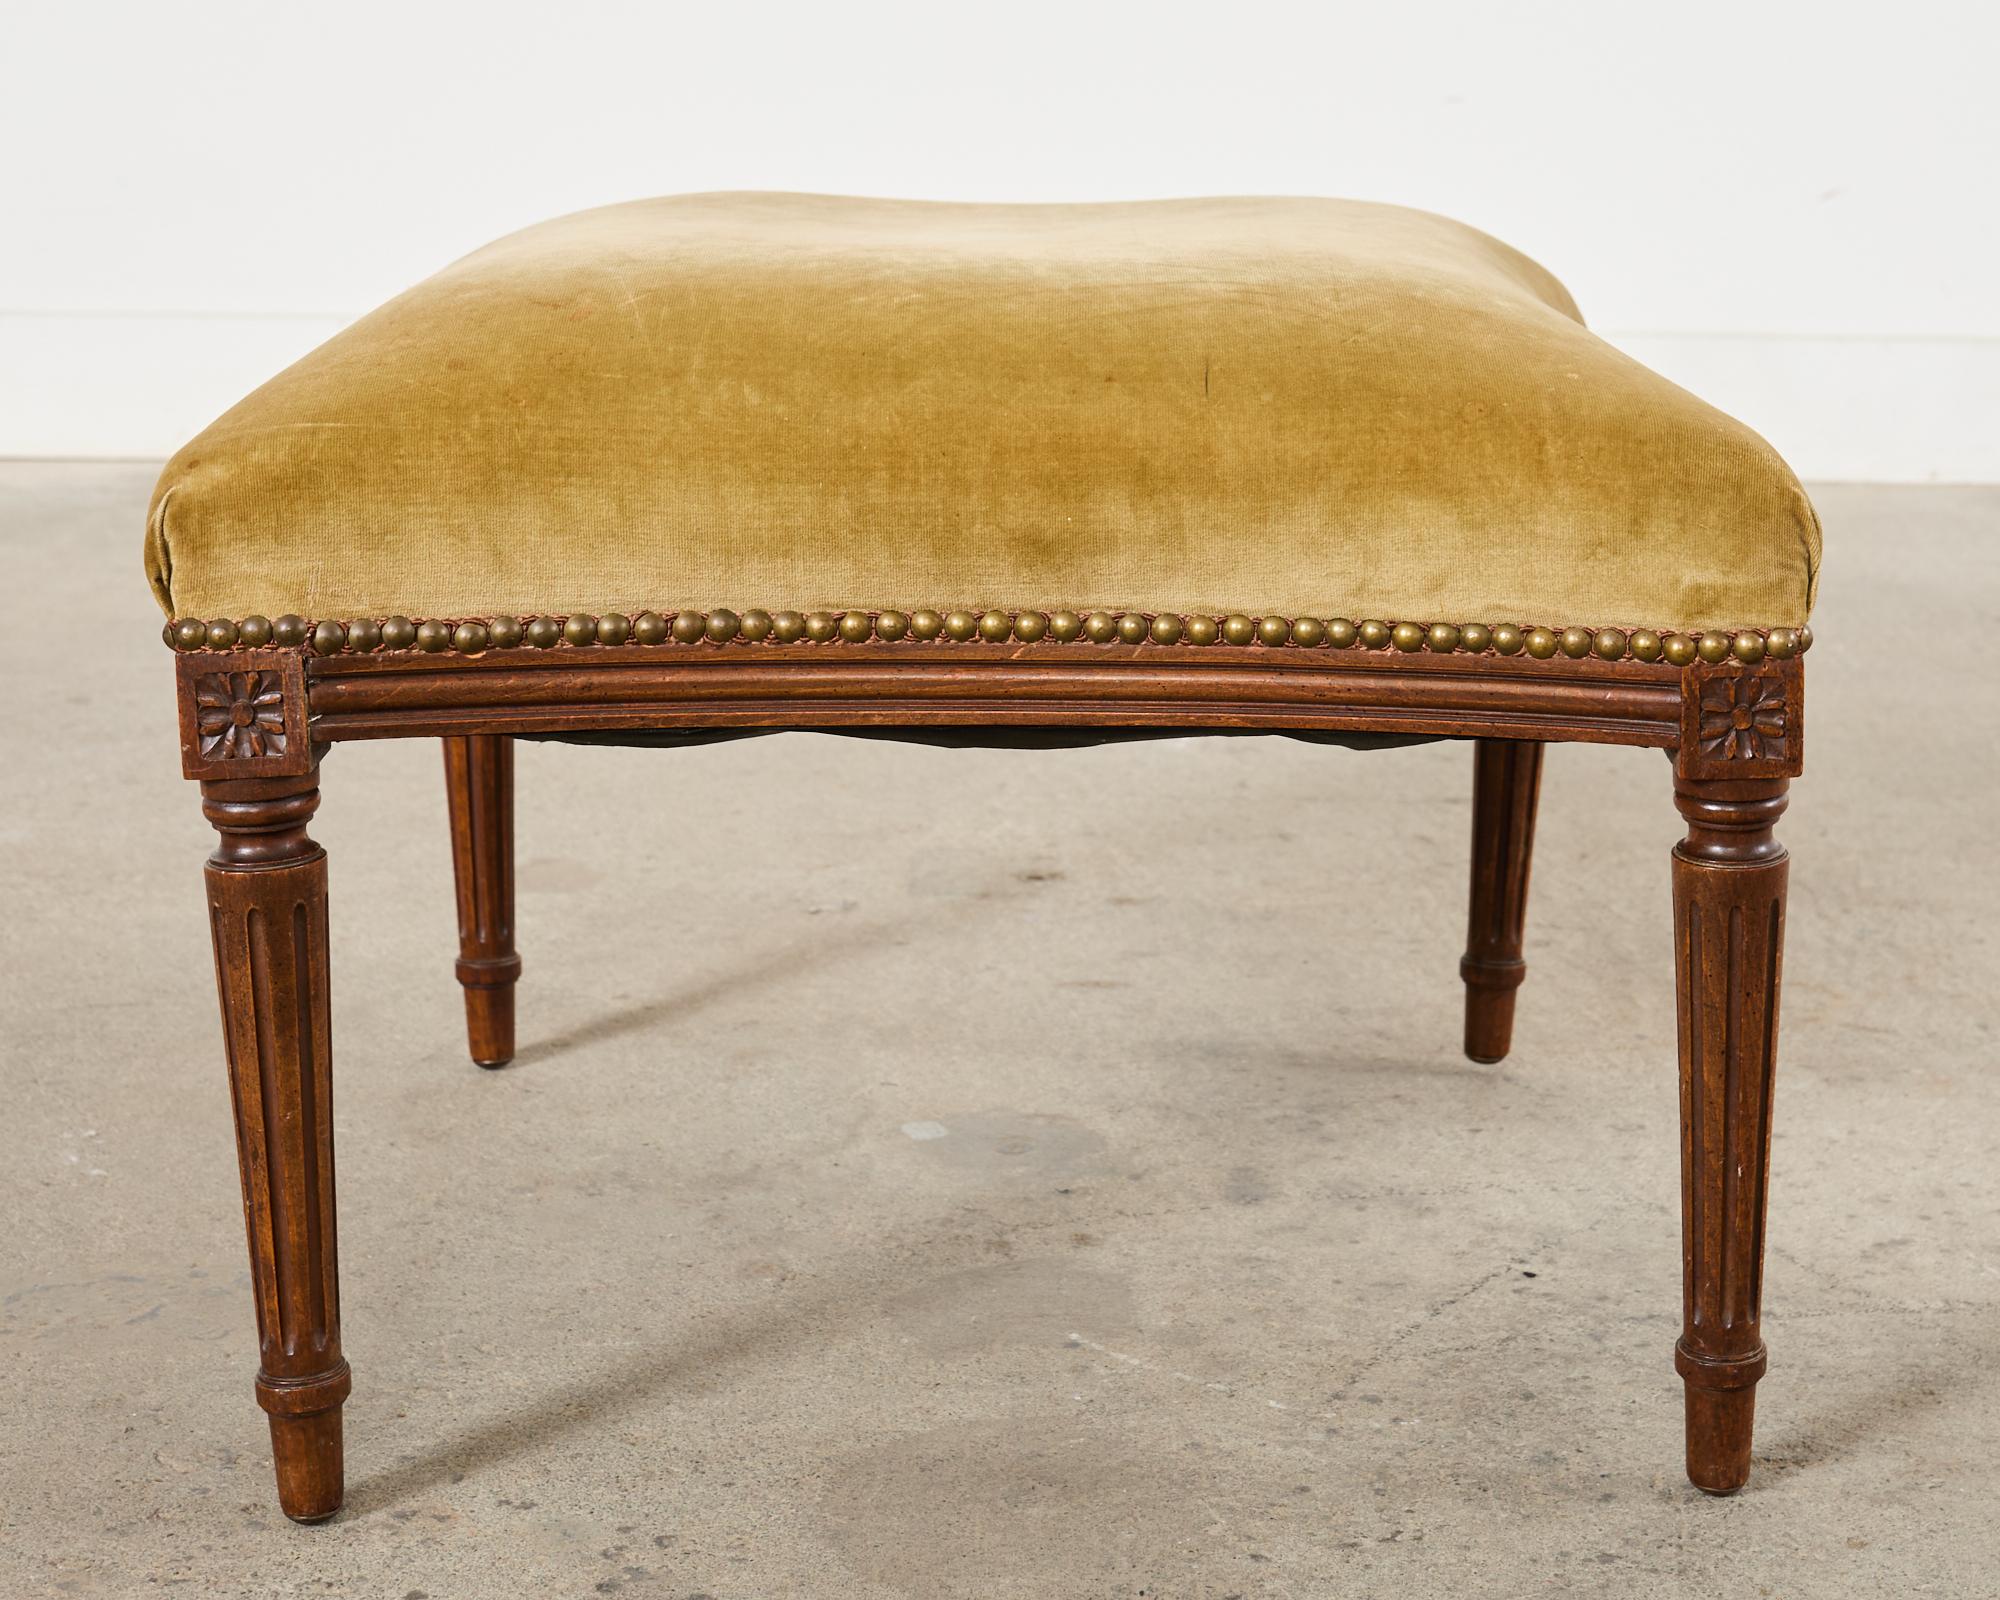 19th Century French Louis XVI Style Mahogany Footstool or Ottoman For Sale